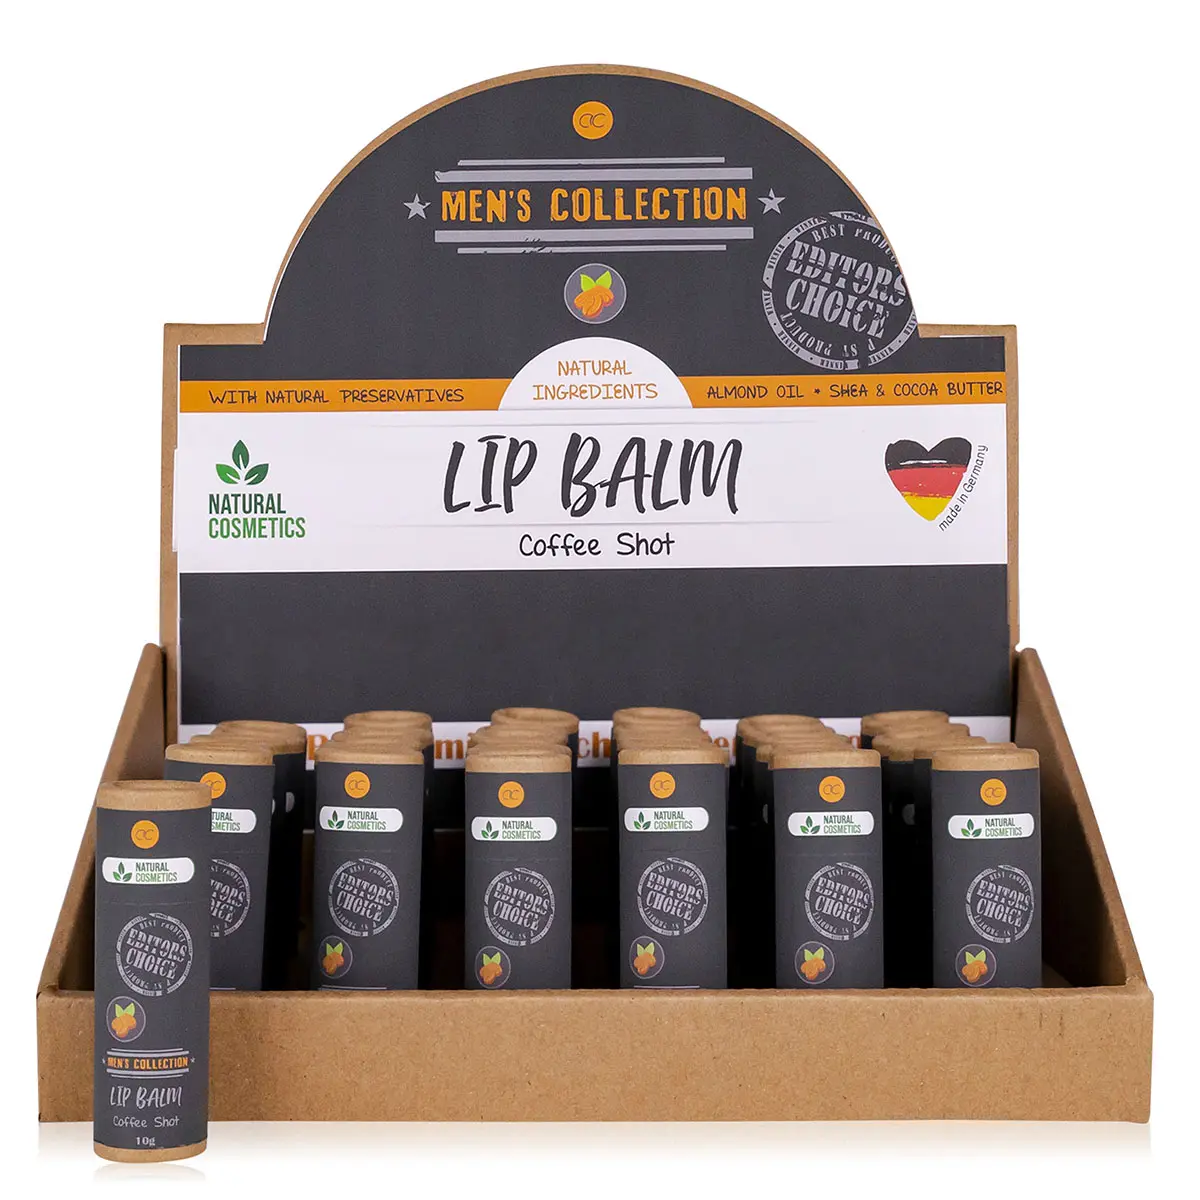 Accentra Lipbalm Men's Collection 10g in brown paper tube  handmade  aroma: coffee shot  color: cream white in display